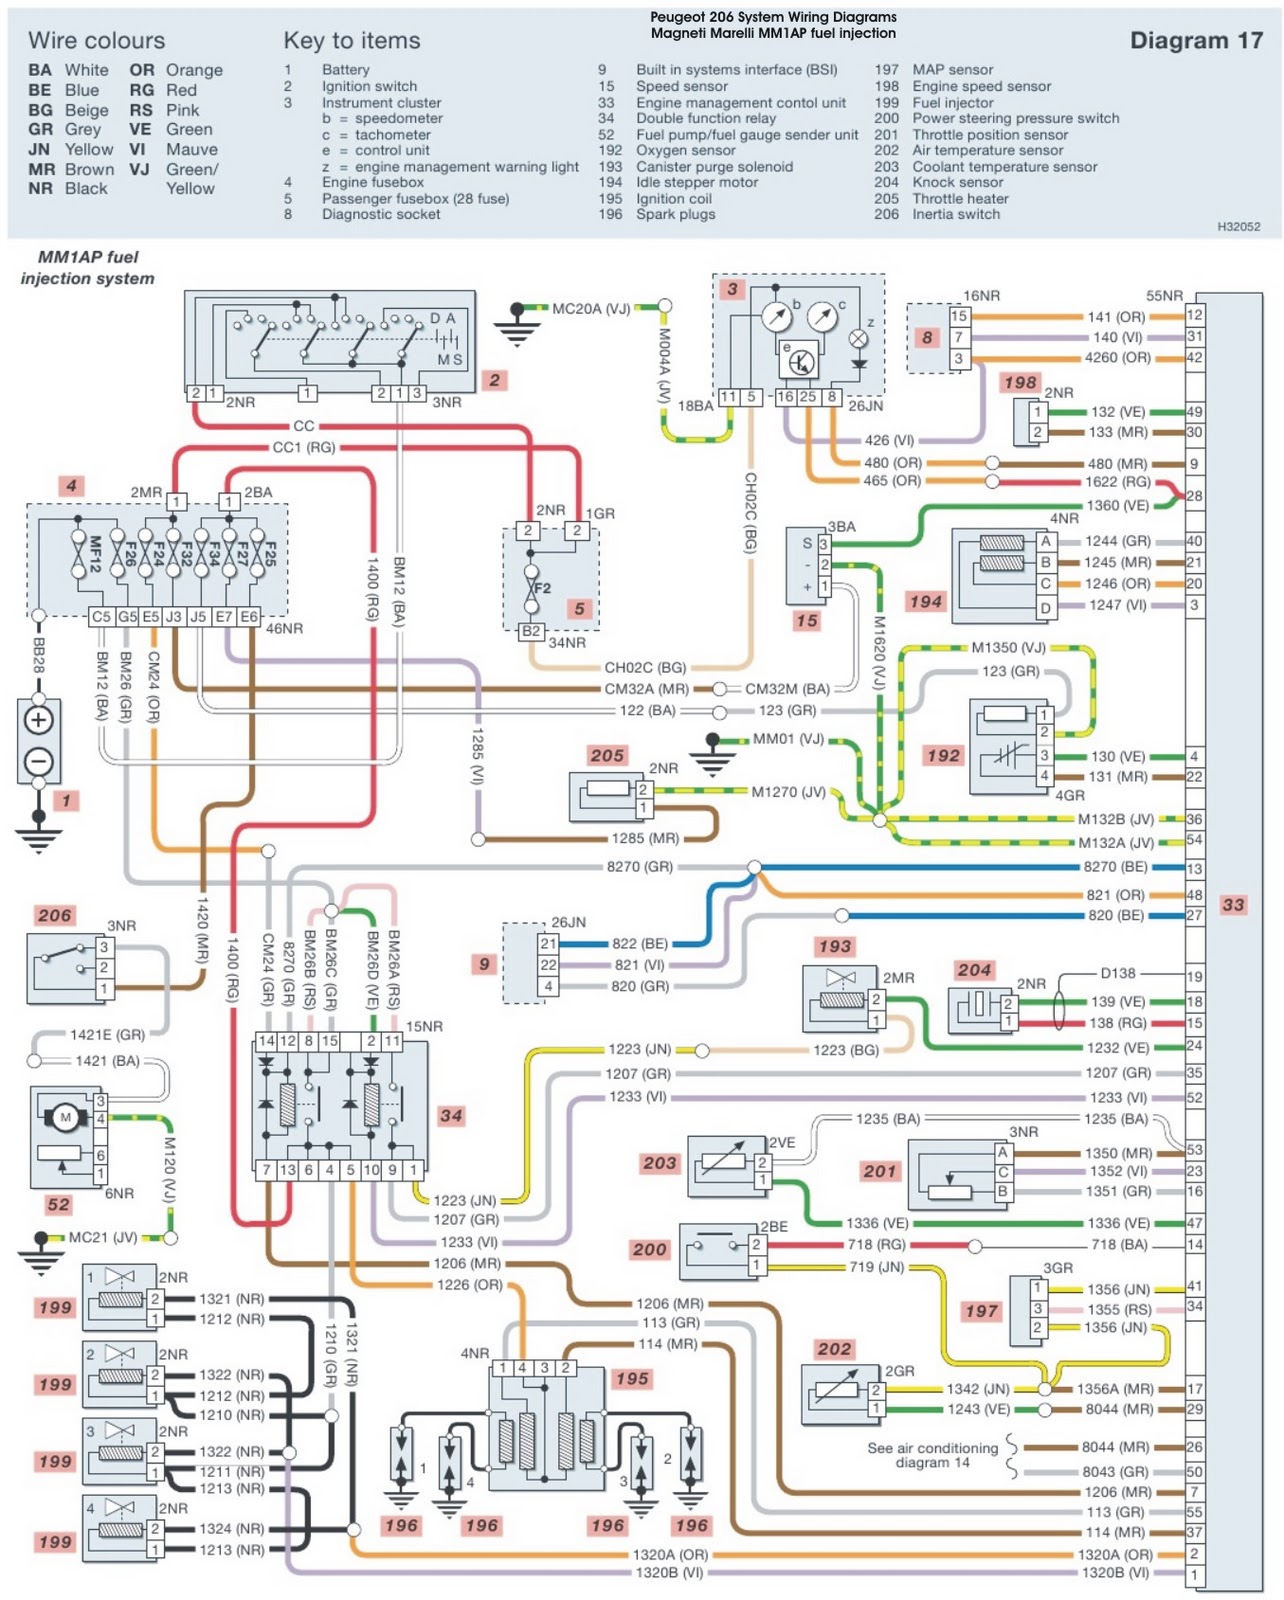 Peugeot 206 Fuel Injection System Wiring Diagrams